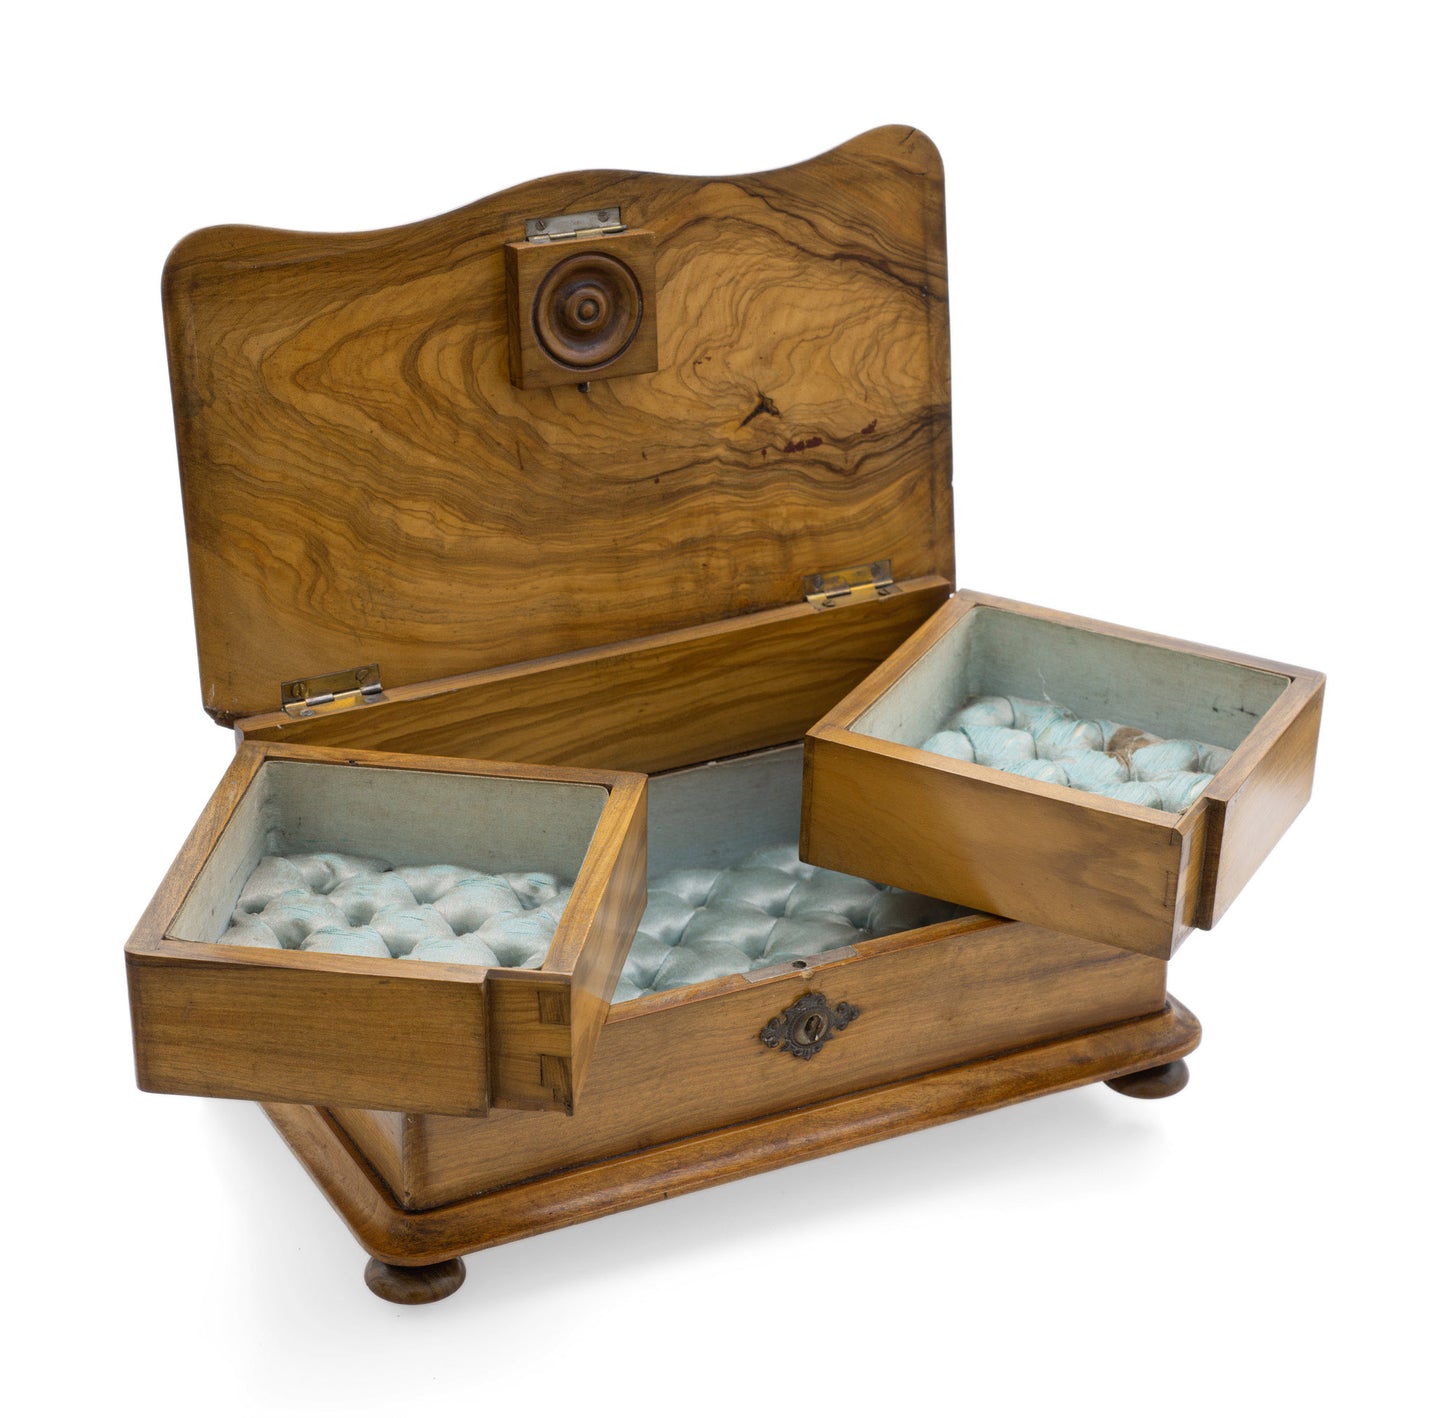 Antique Italian Olive Wood Jewellery Box with Swing Out Trays & Turned Feet (Code 2539)